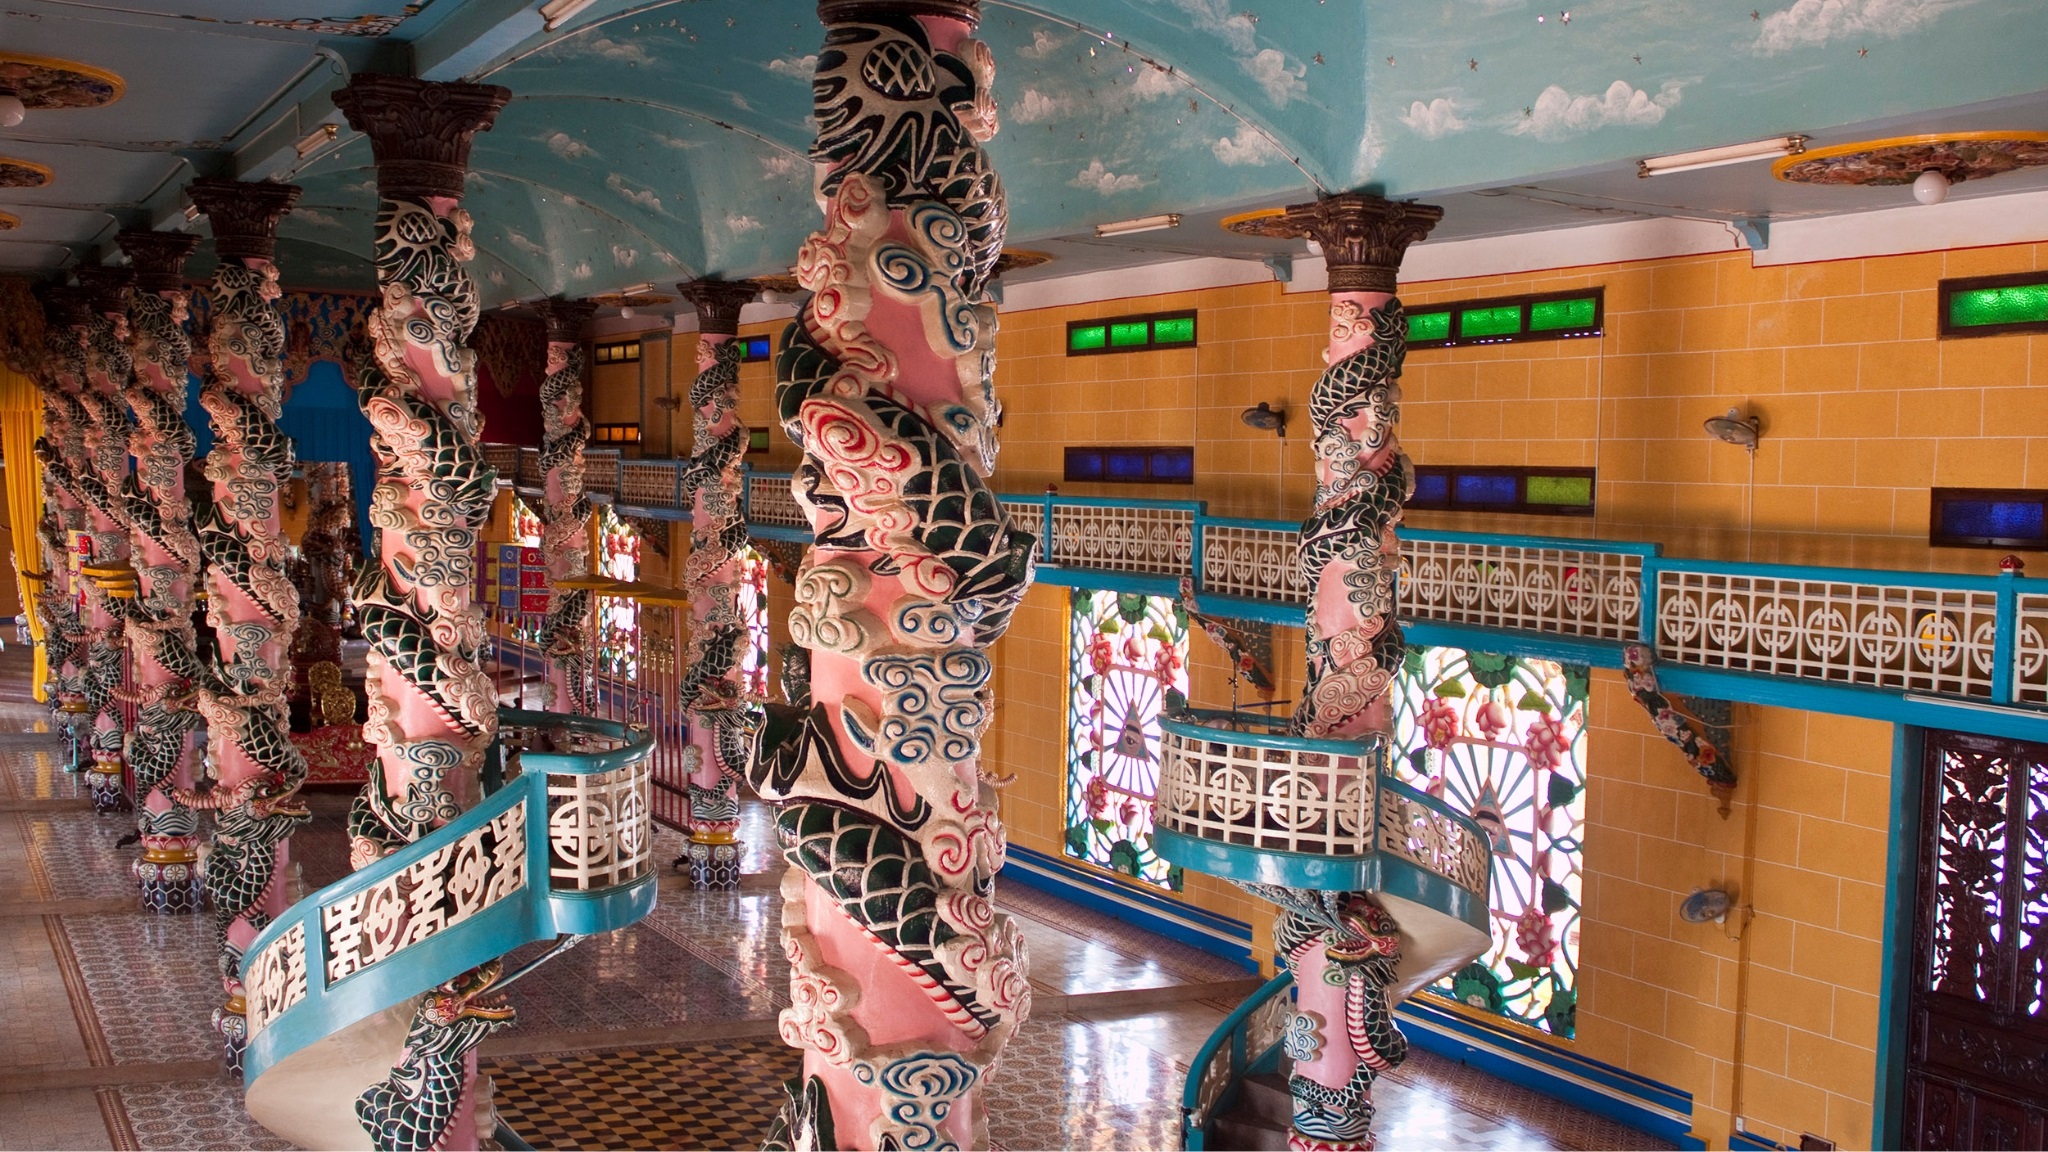 Chanh Dien Is Decorated With Several Religious Elements